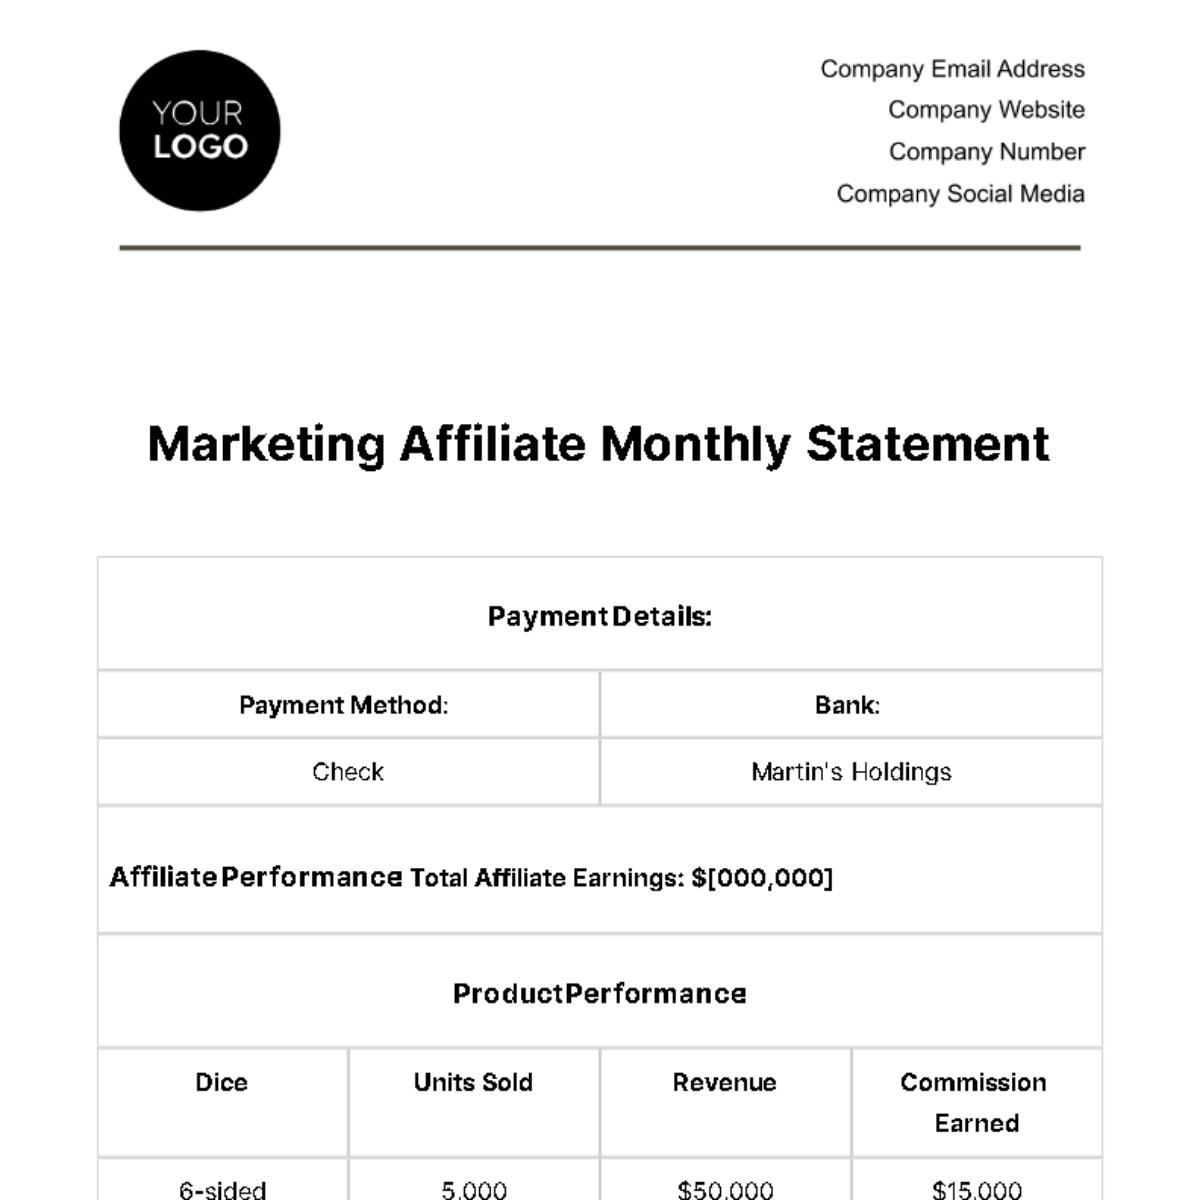 Free Marketing Affiliate Monthly Statement Template